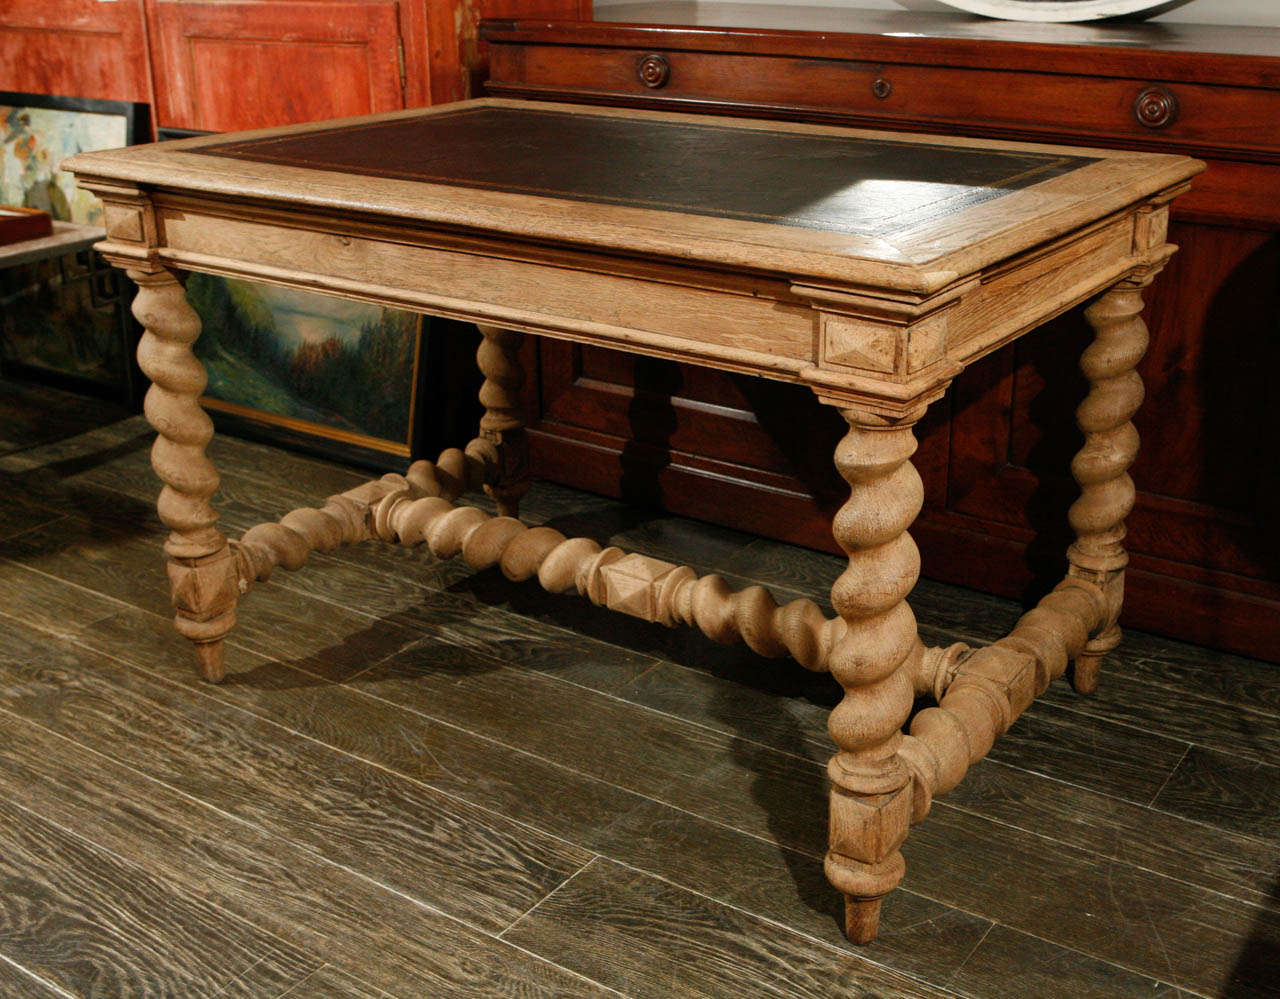 A 19th c. writing table in bleached oak with black leather top.